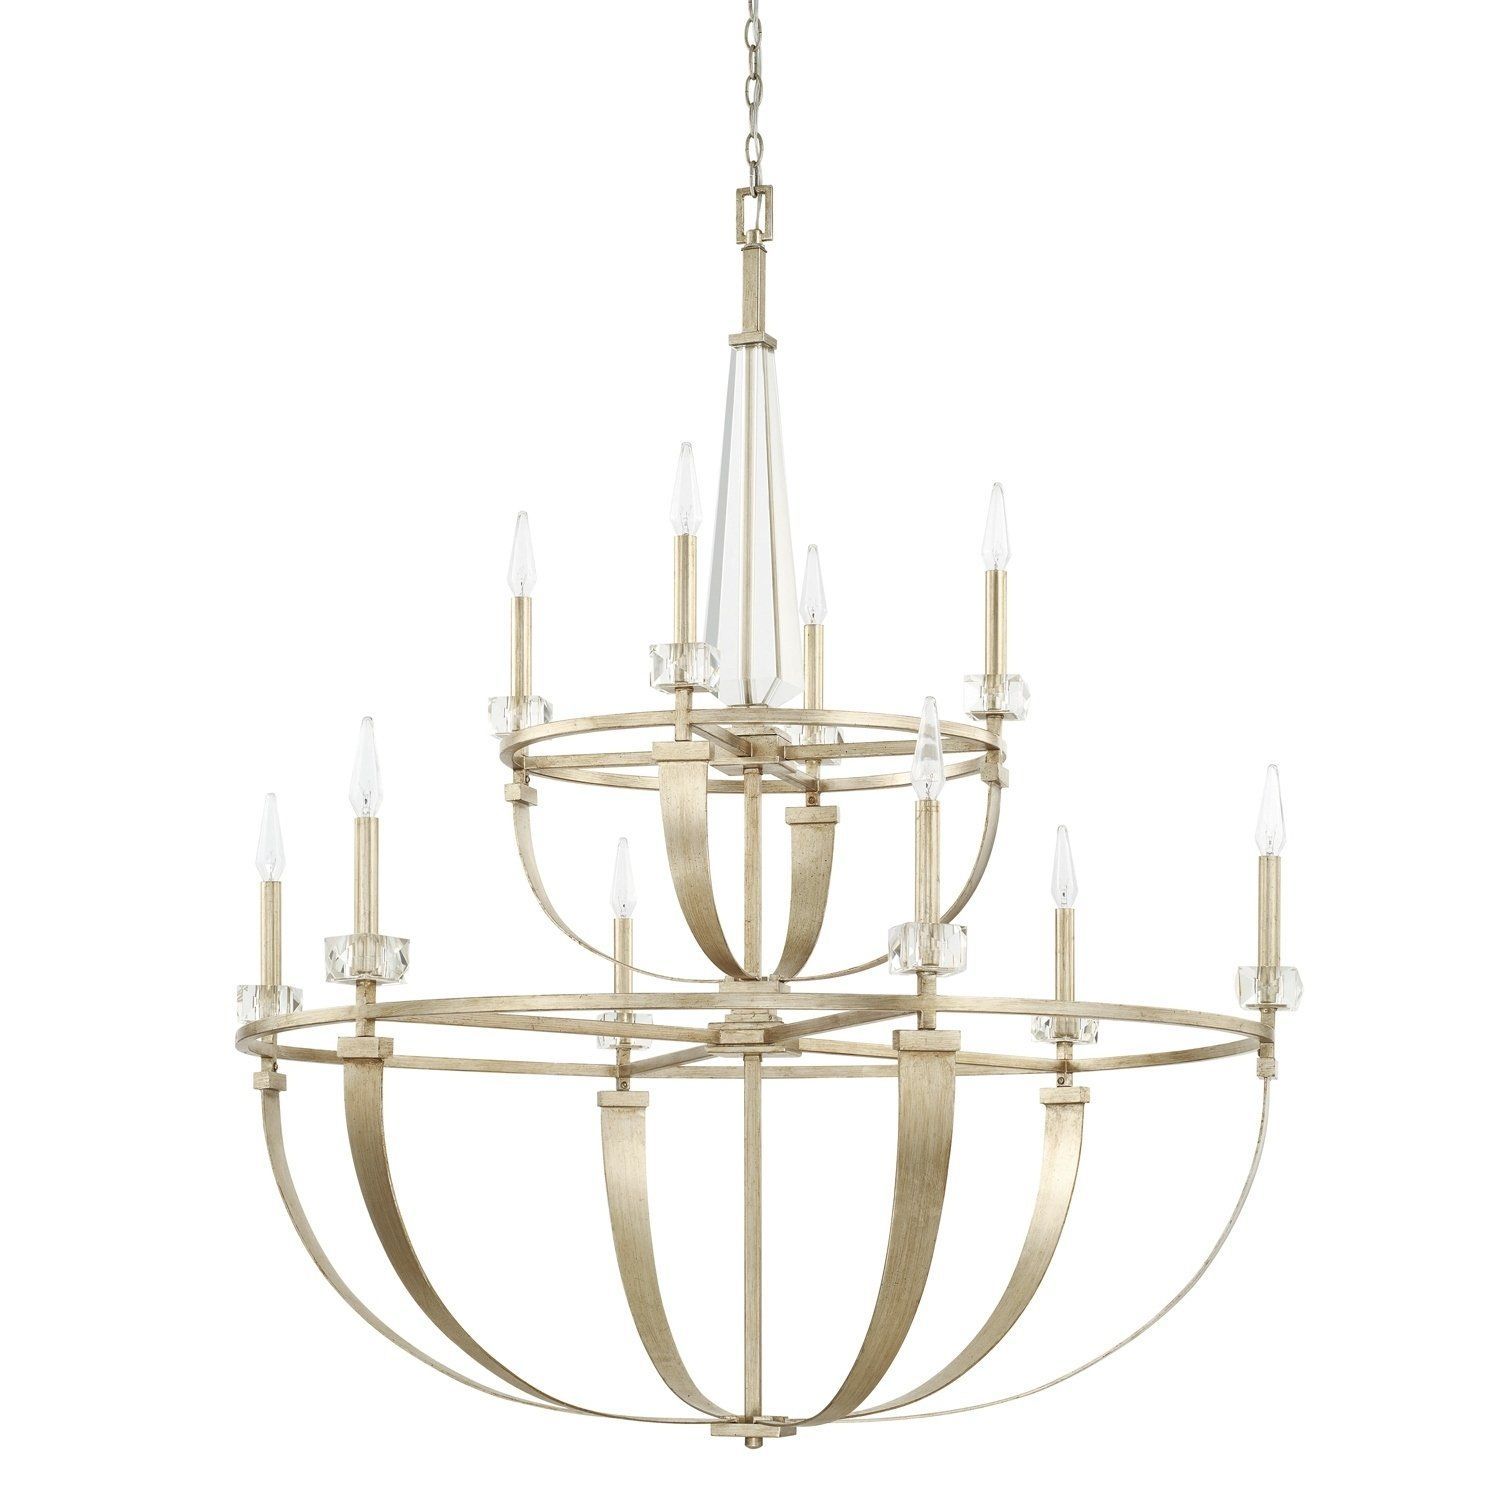 Ceiling Lights | Chandelier Ceiling Lights, Capital For Winter Gold Chandeliers (View 11 of 15)